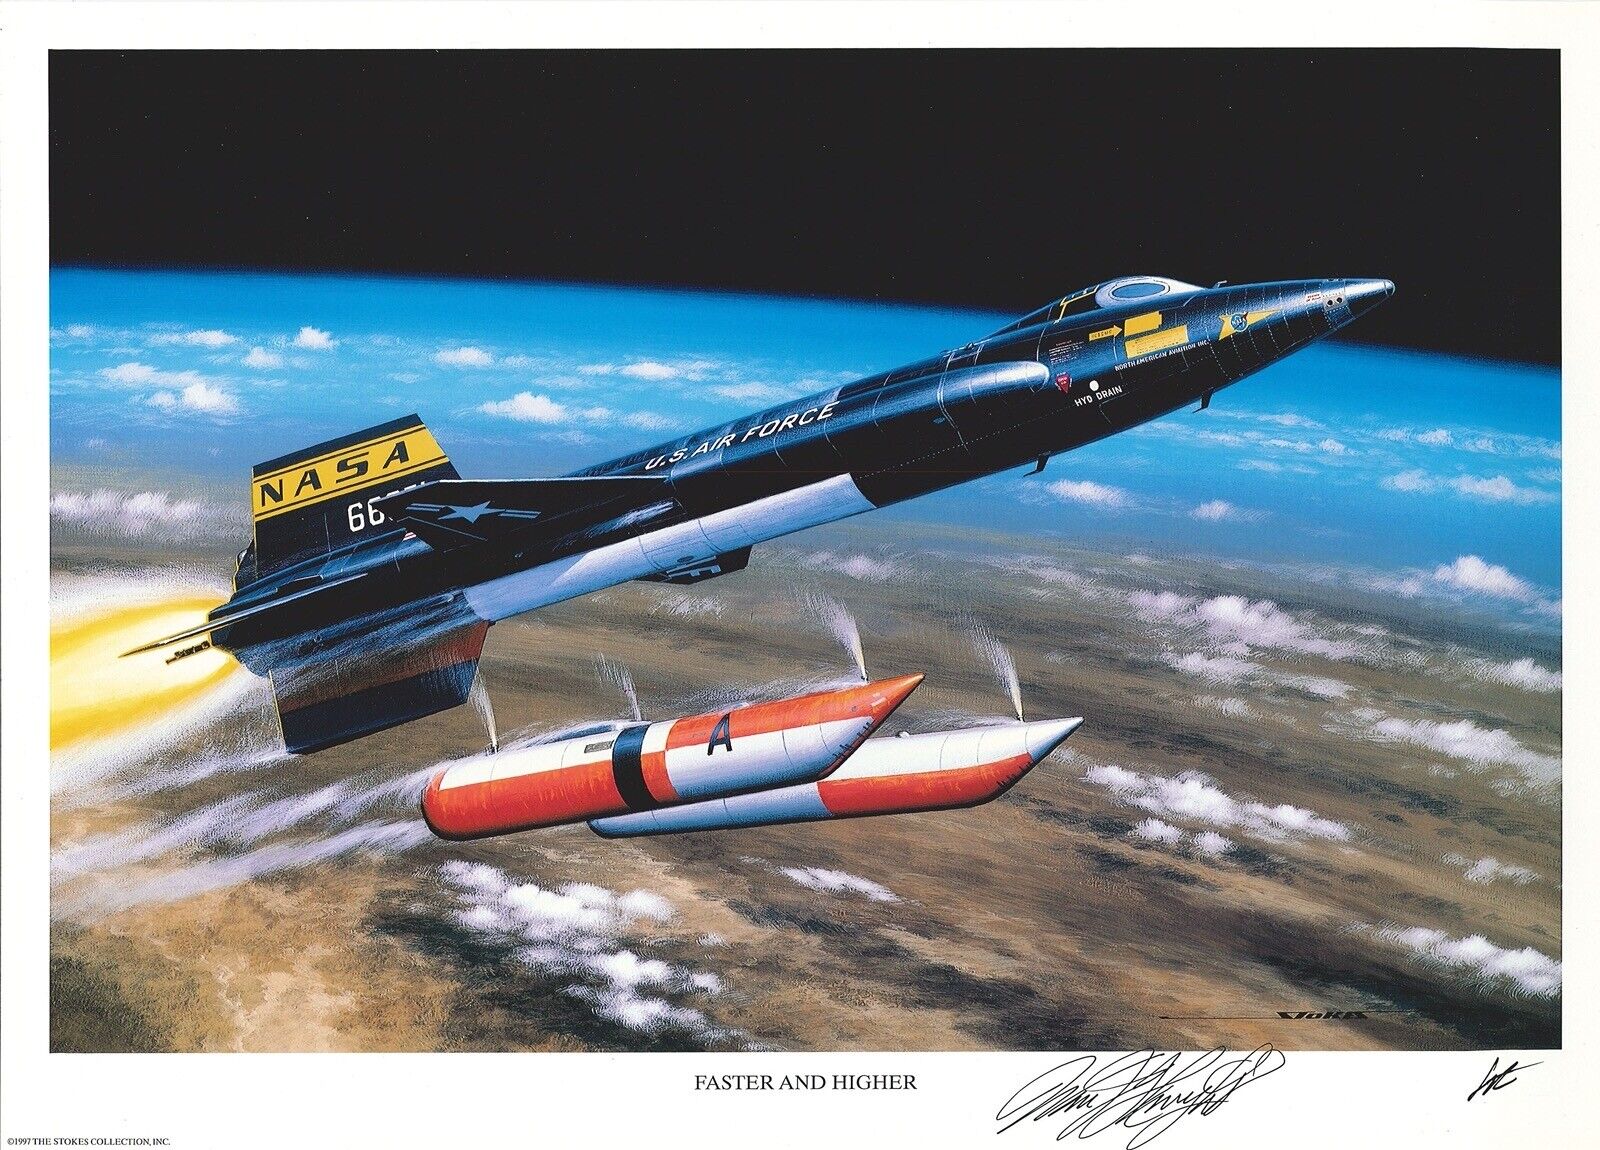 WILLIAM PETE KNIGHT SIGNED FASTER AND HIGHER PRINT STAN STOKES X-15 (D)